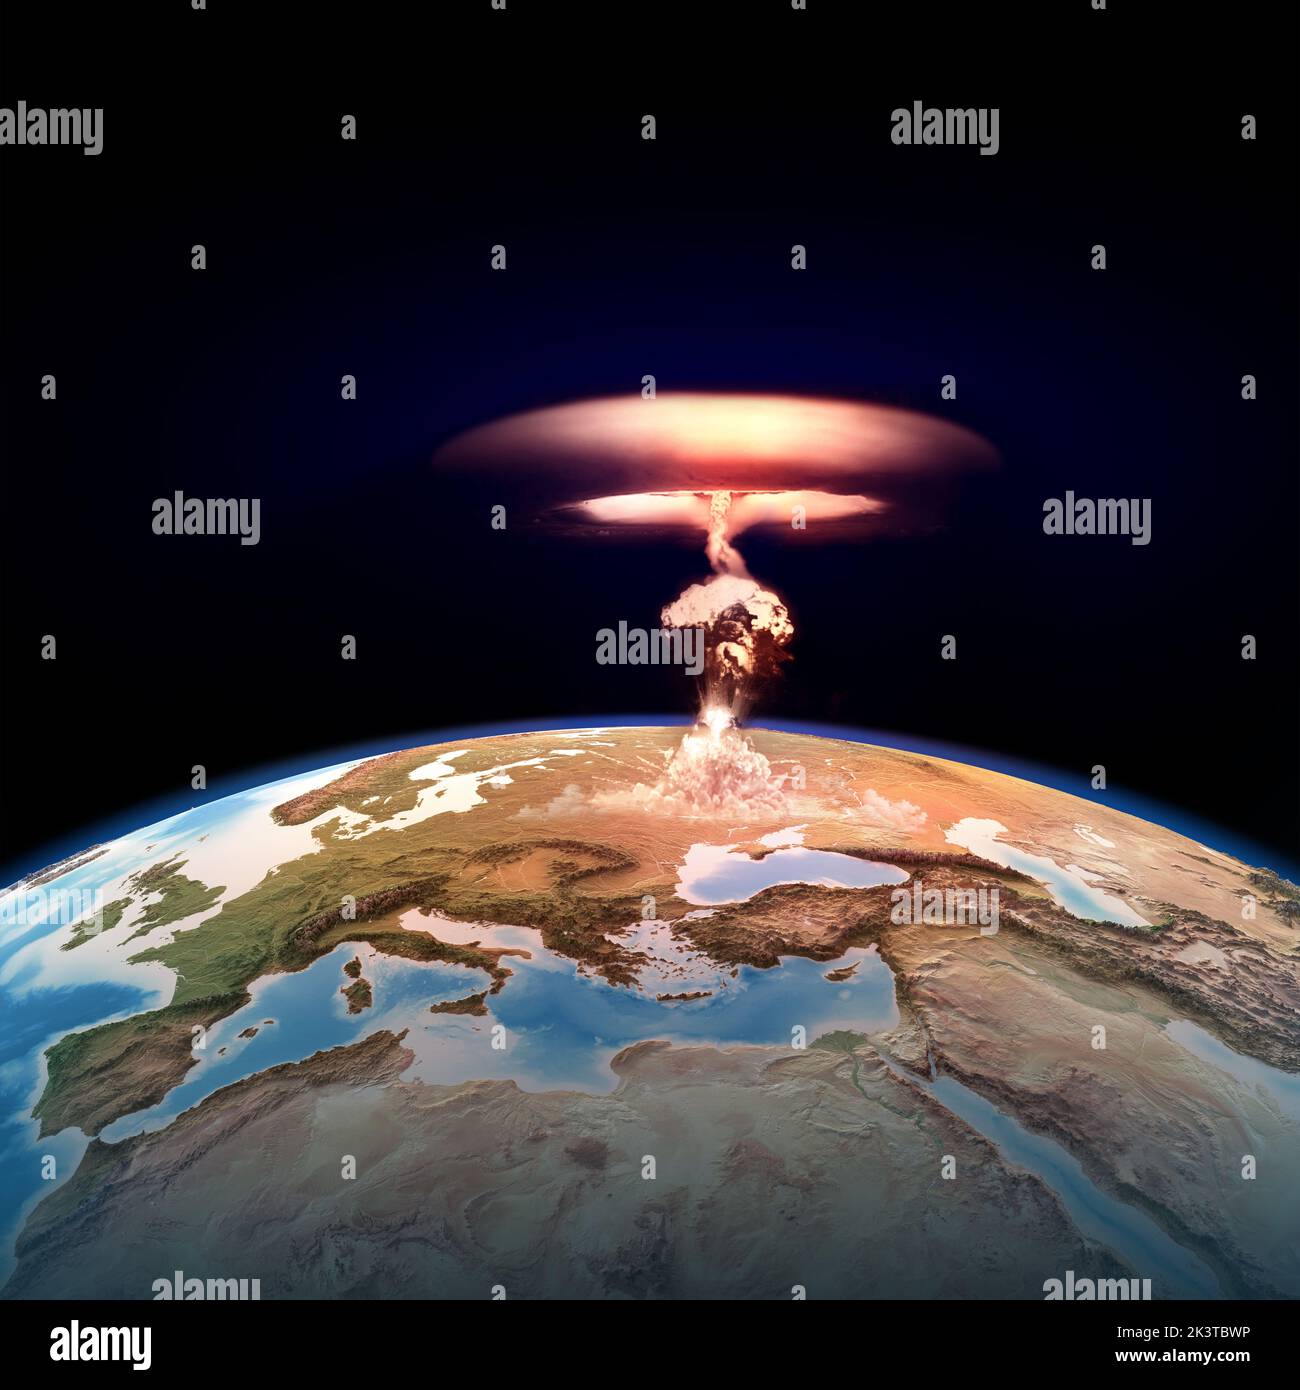 Atomic bomb explosion on Europe. Nuclear war starting with a mushroom cloud, dangers of nuclear energy for planet Earth - elements furnished by NASA Stock Photo